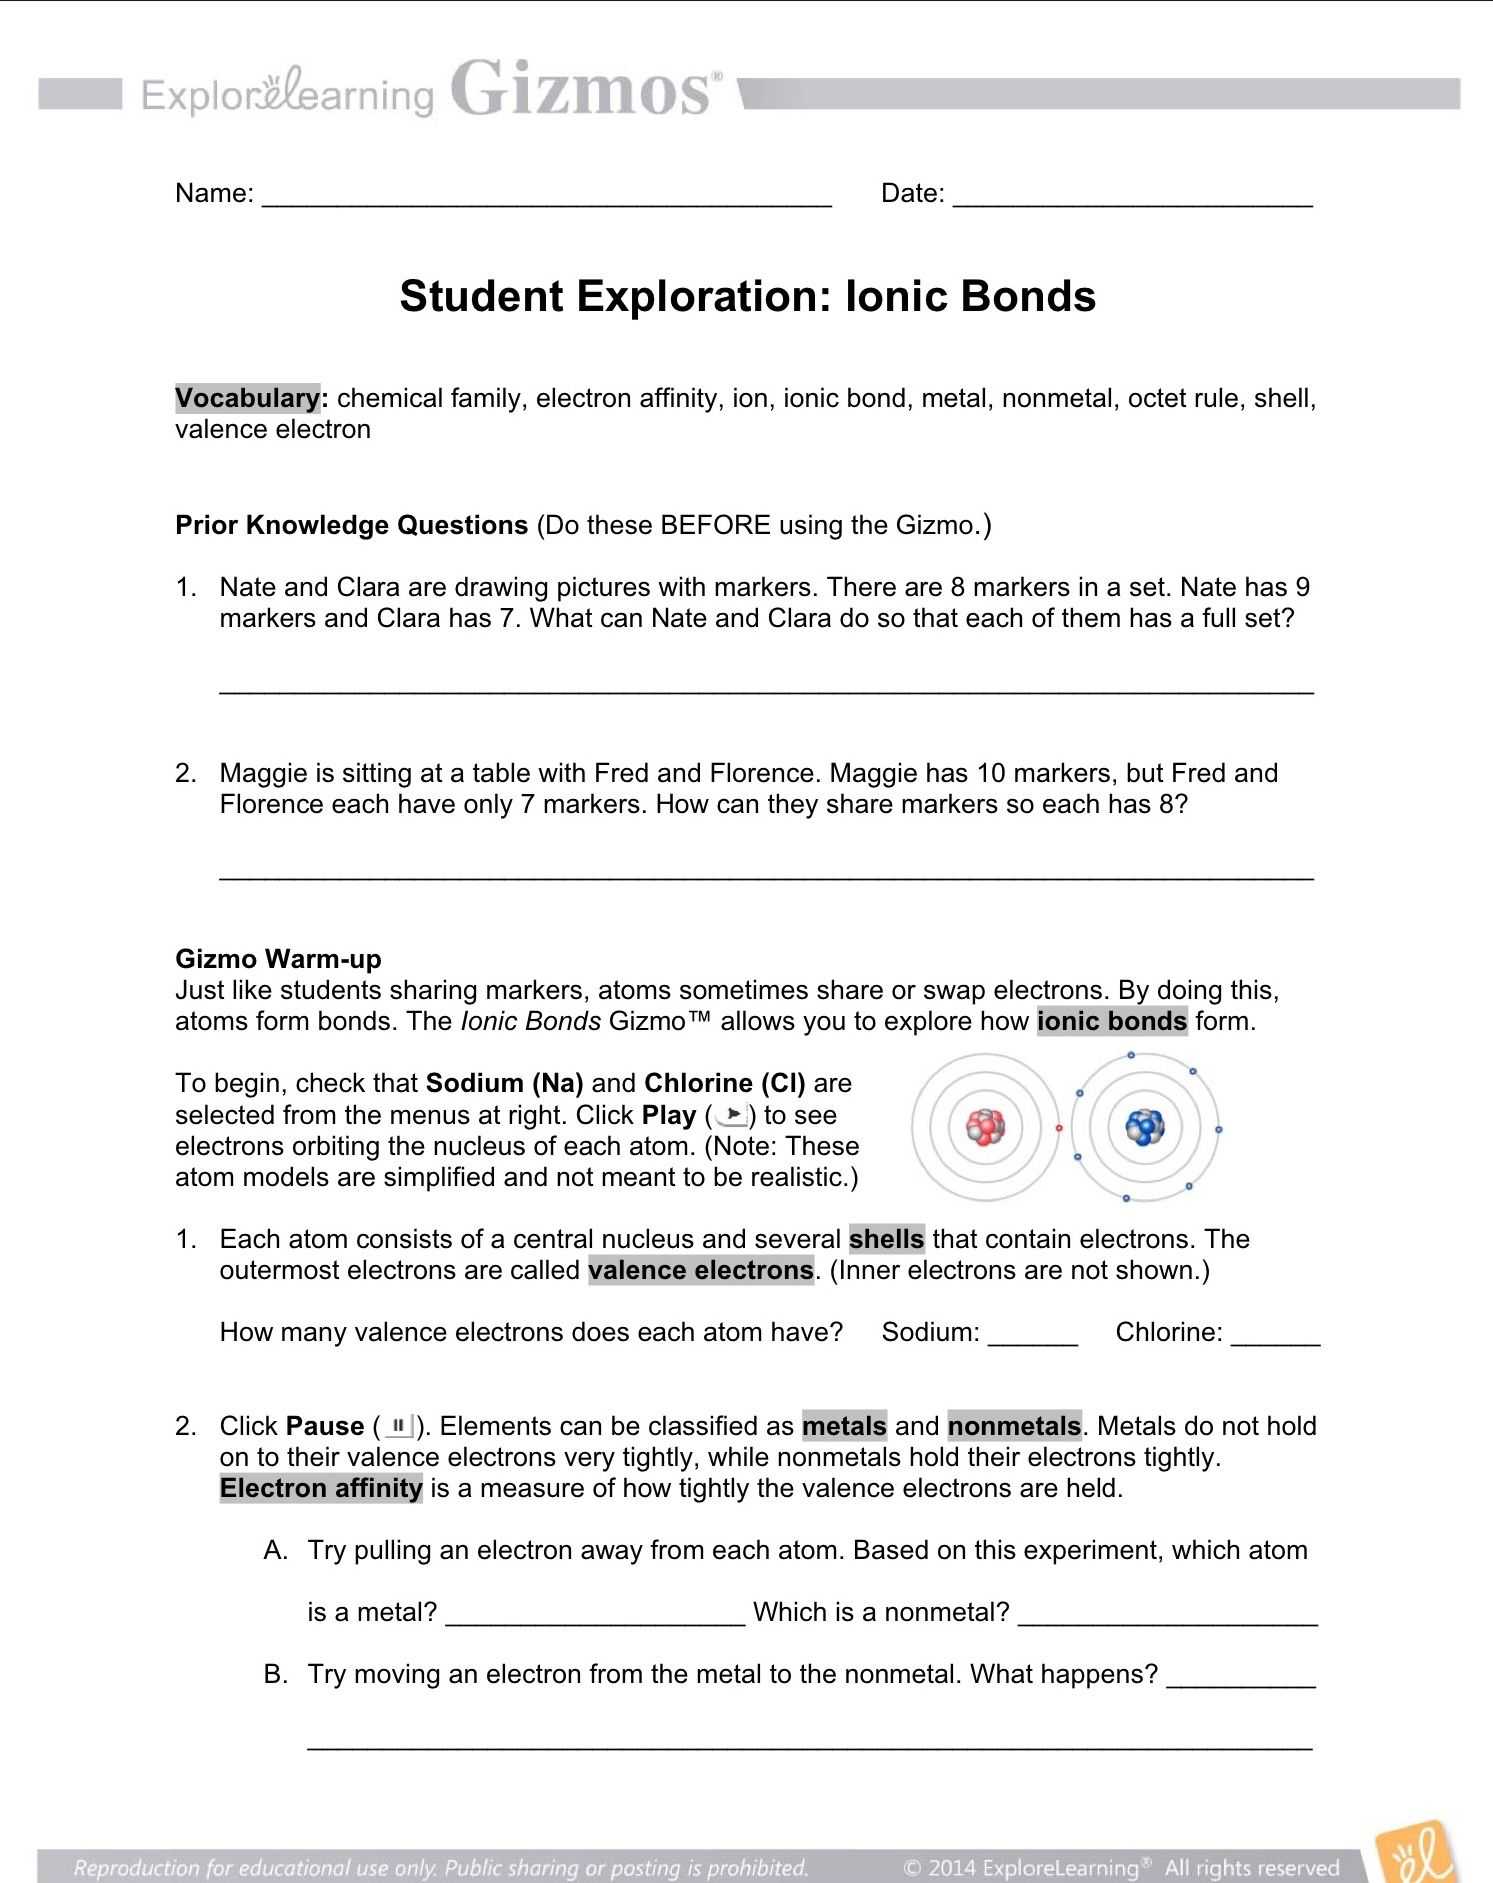 Simple and Compound Interest Practice Worksheet Answer Key as Well as Ionic Bonds Student Exploration Gizmo Worksheet